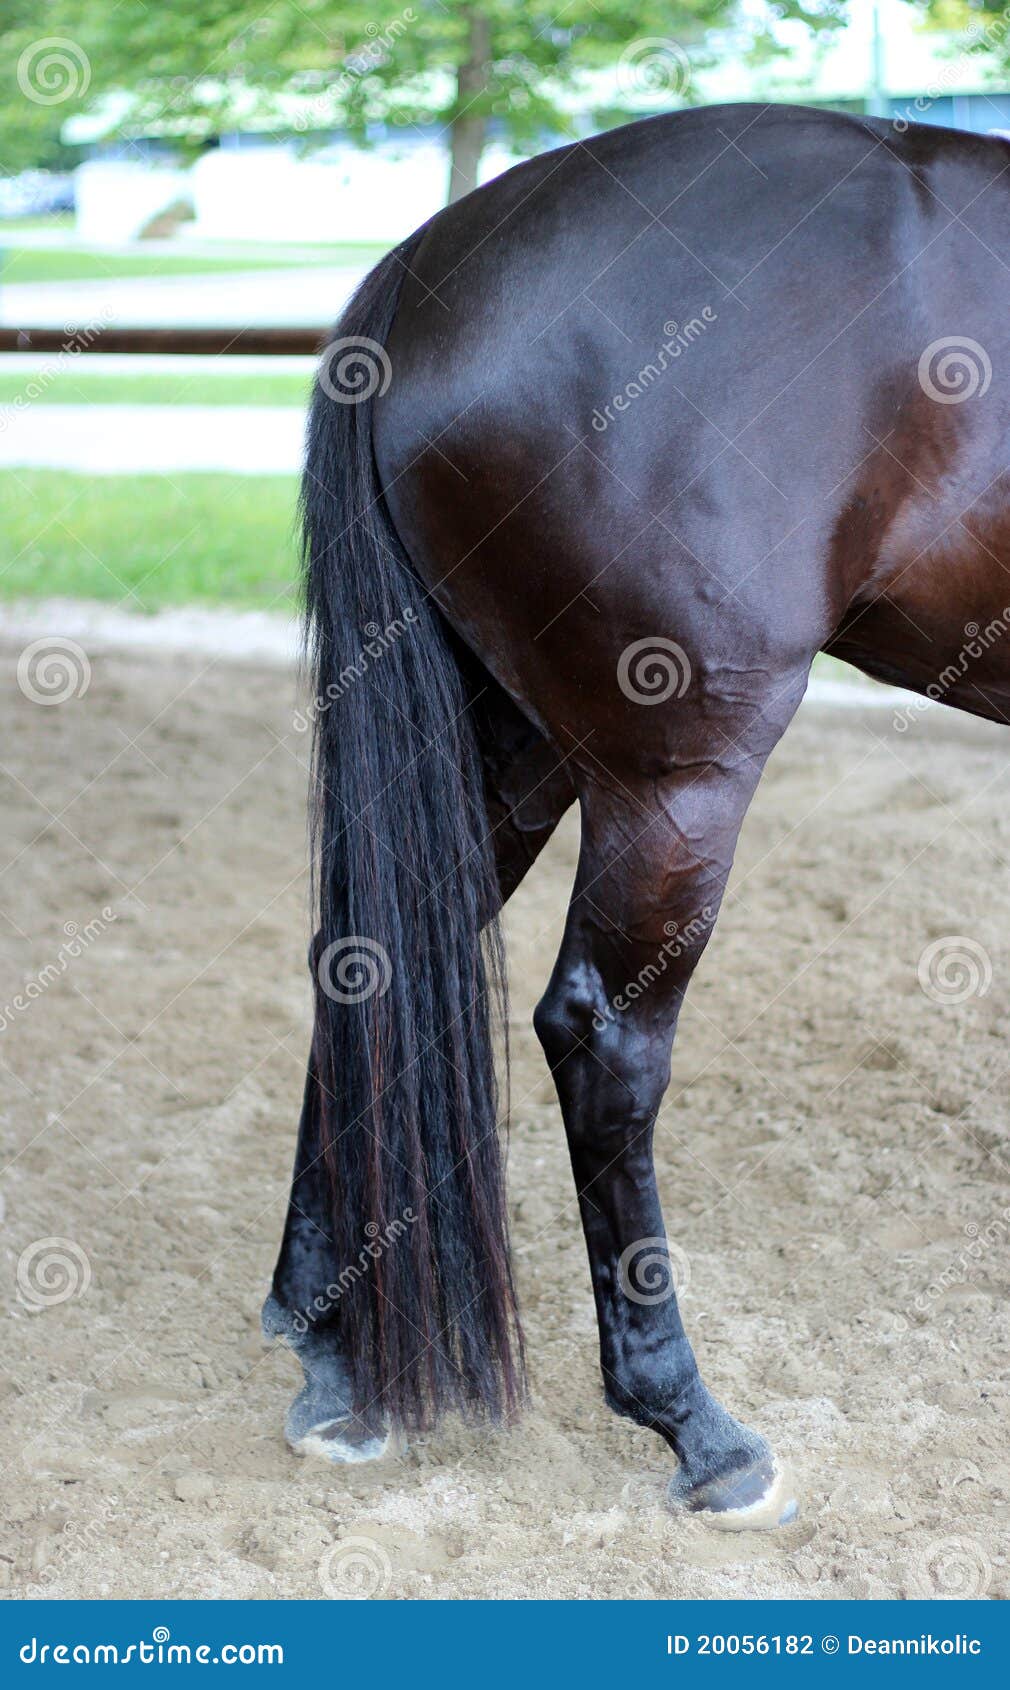 horse tail